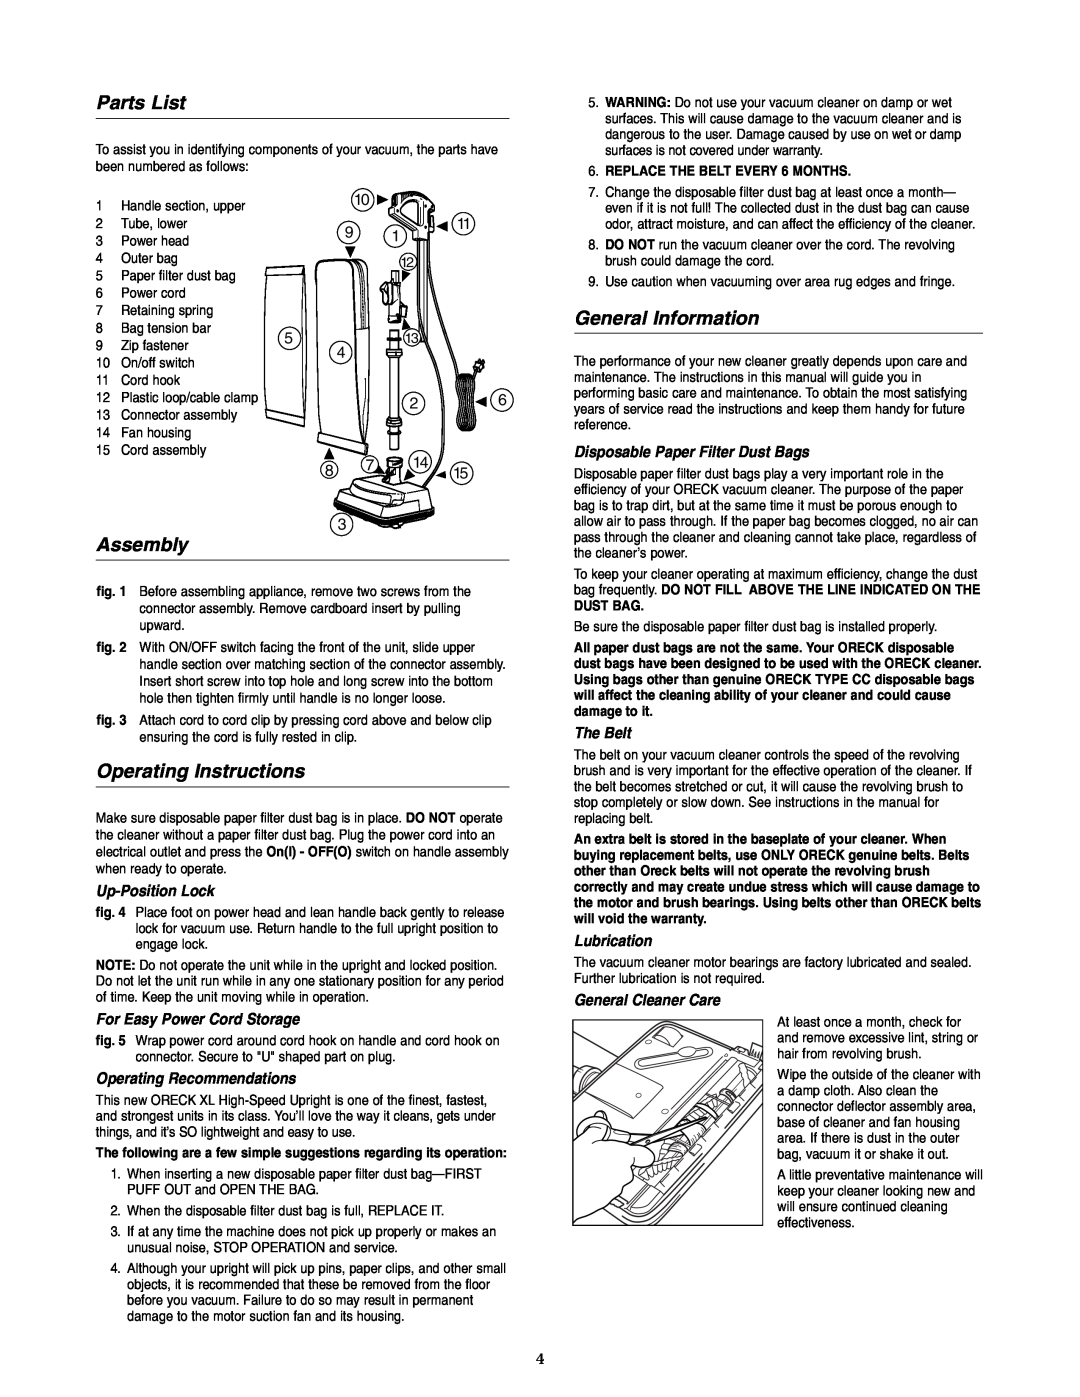 Oreck U4490HH Parts List, Assembly, Operating Instructions, General Information, Up-PositionLock, The Belt, Lubrication 